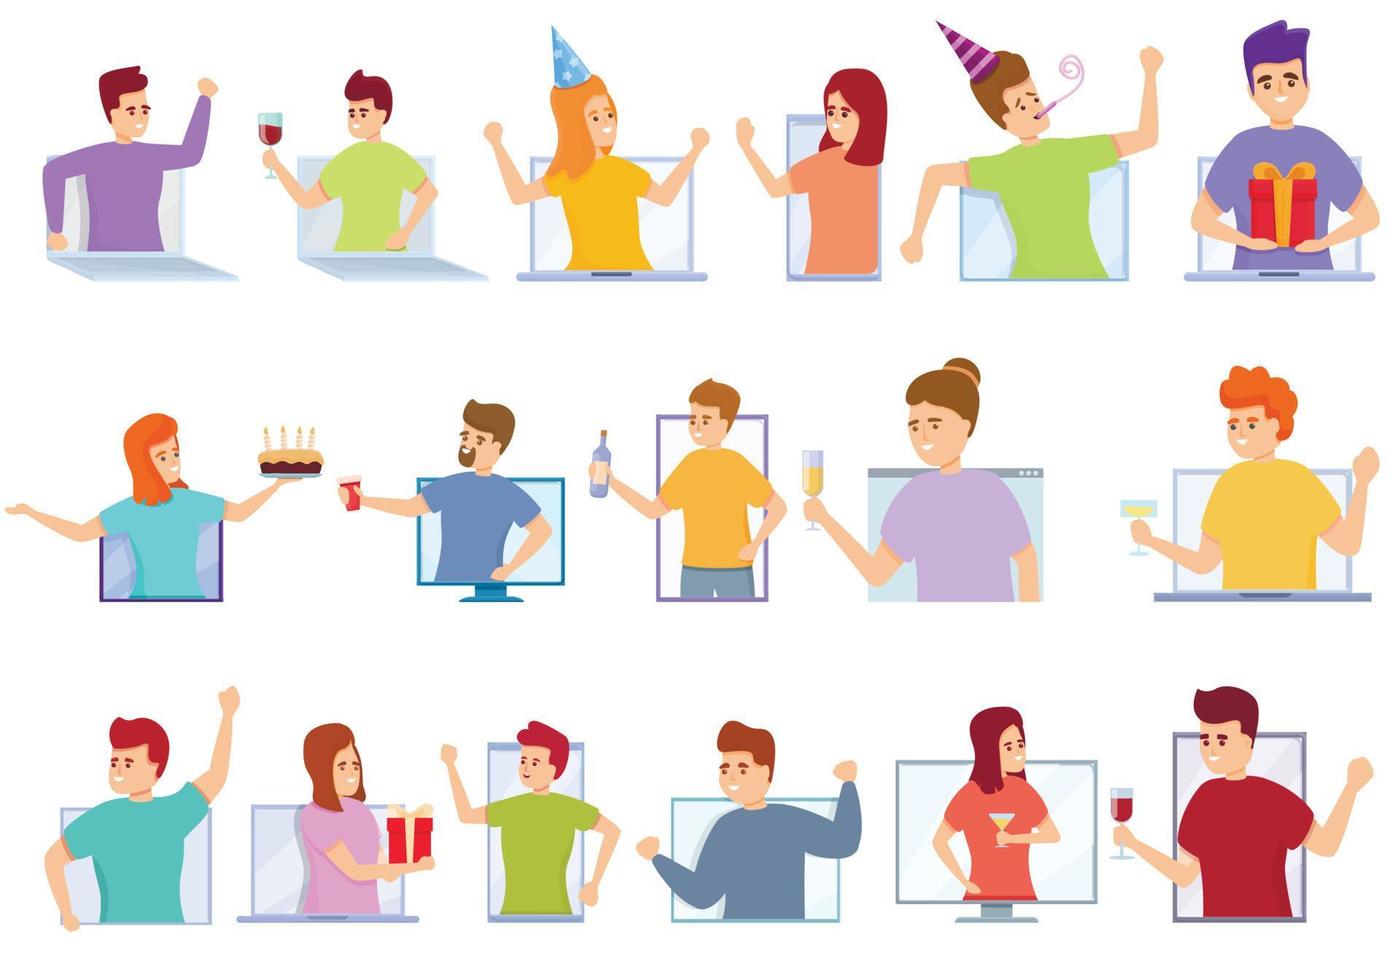 Online party icons set, cartoon style vector